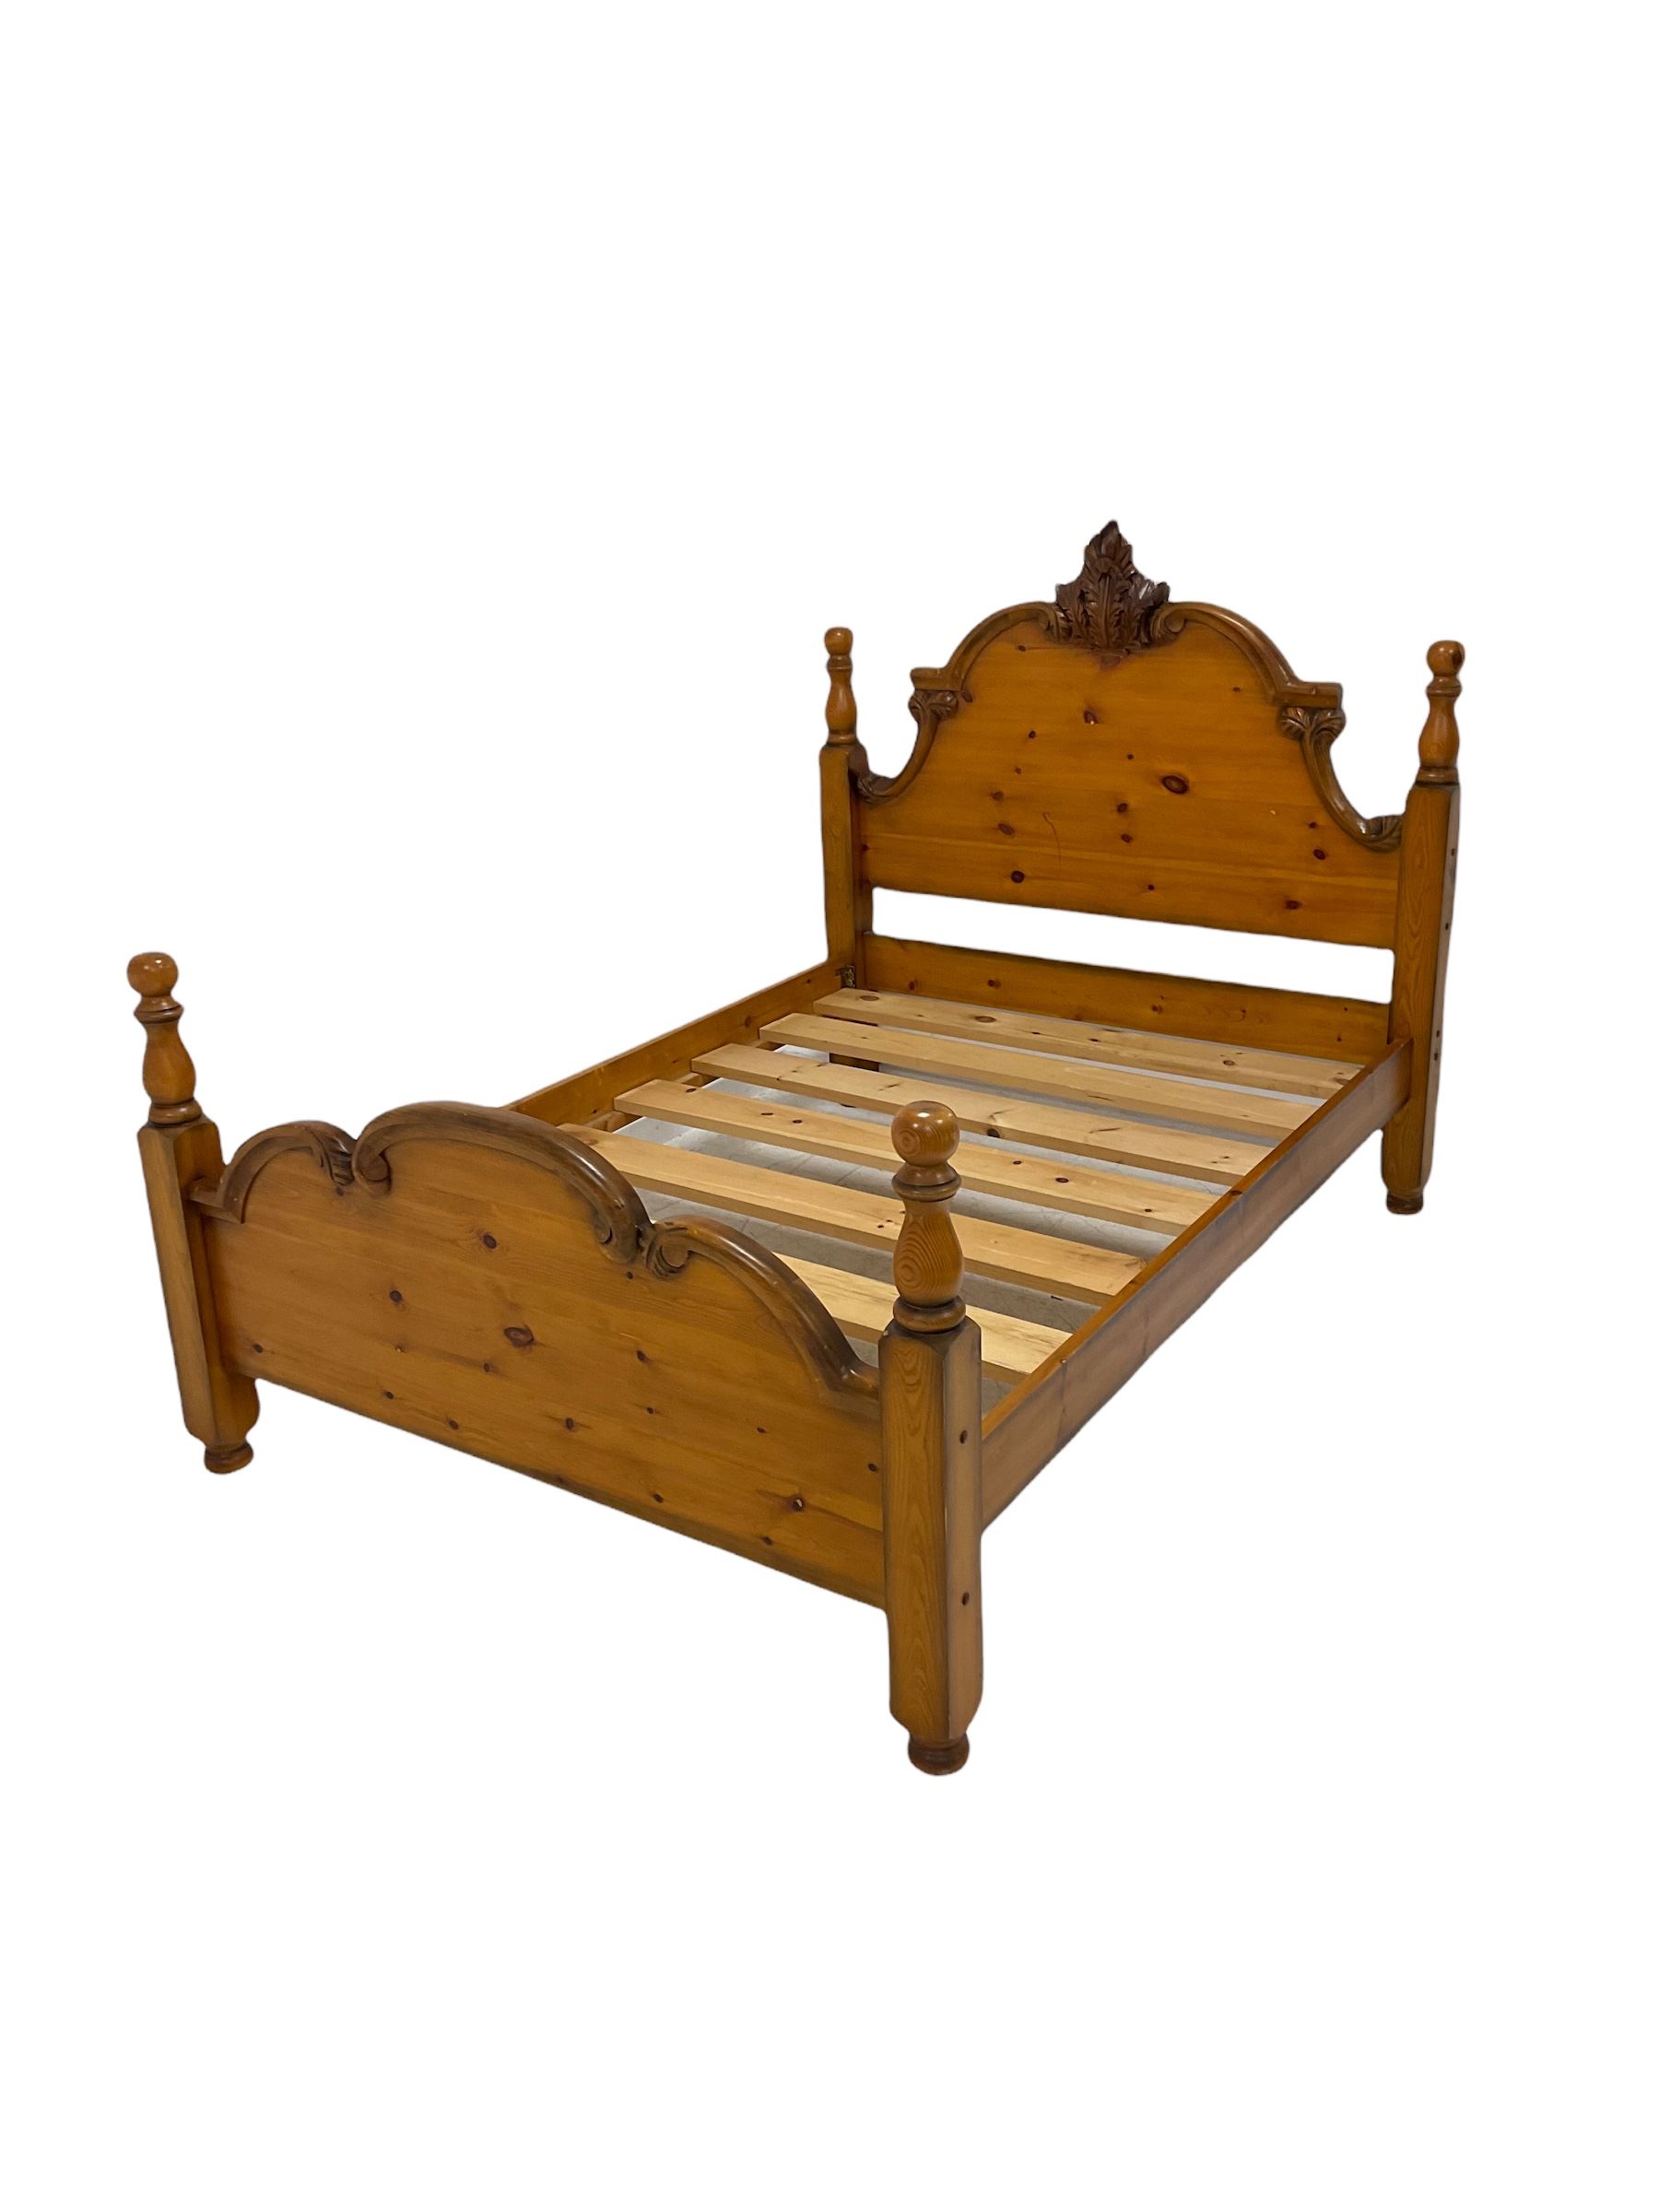 Pine double bed - Image 2 of 3